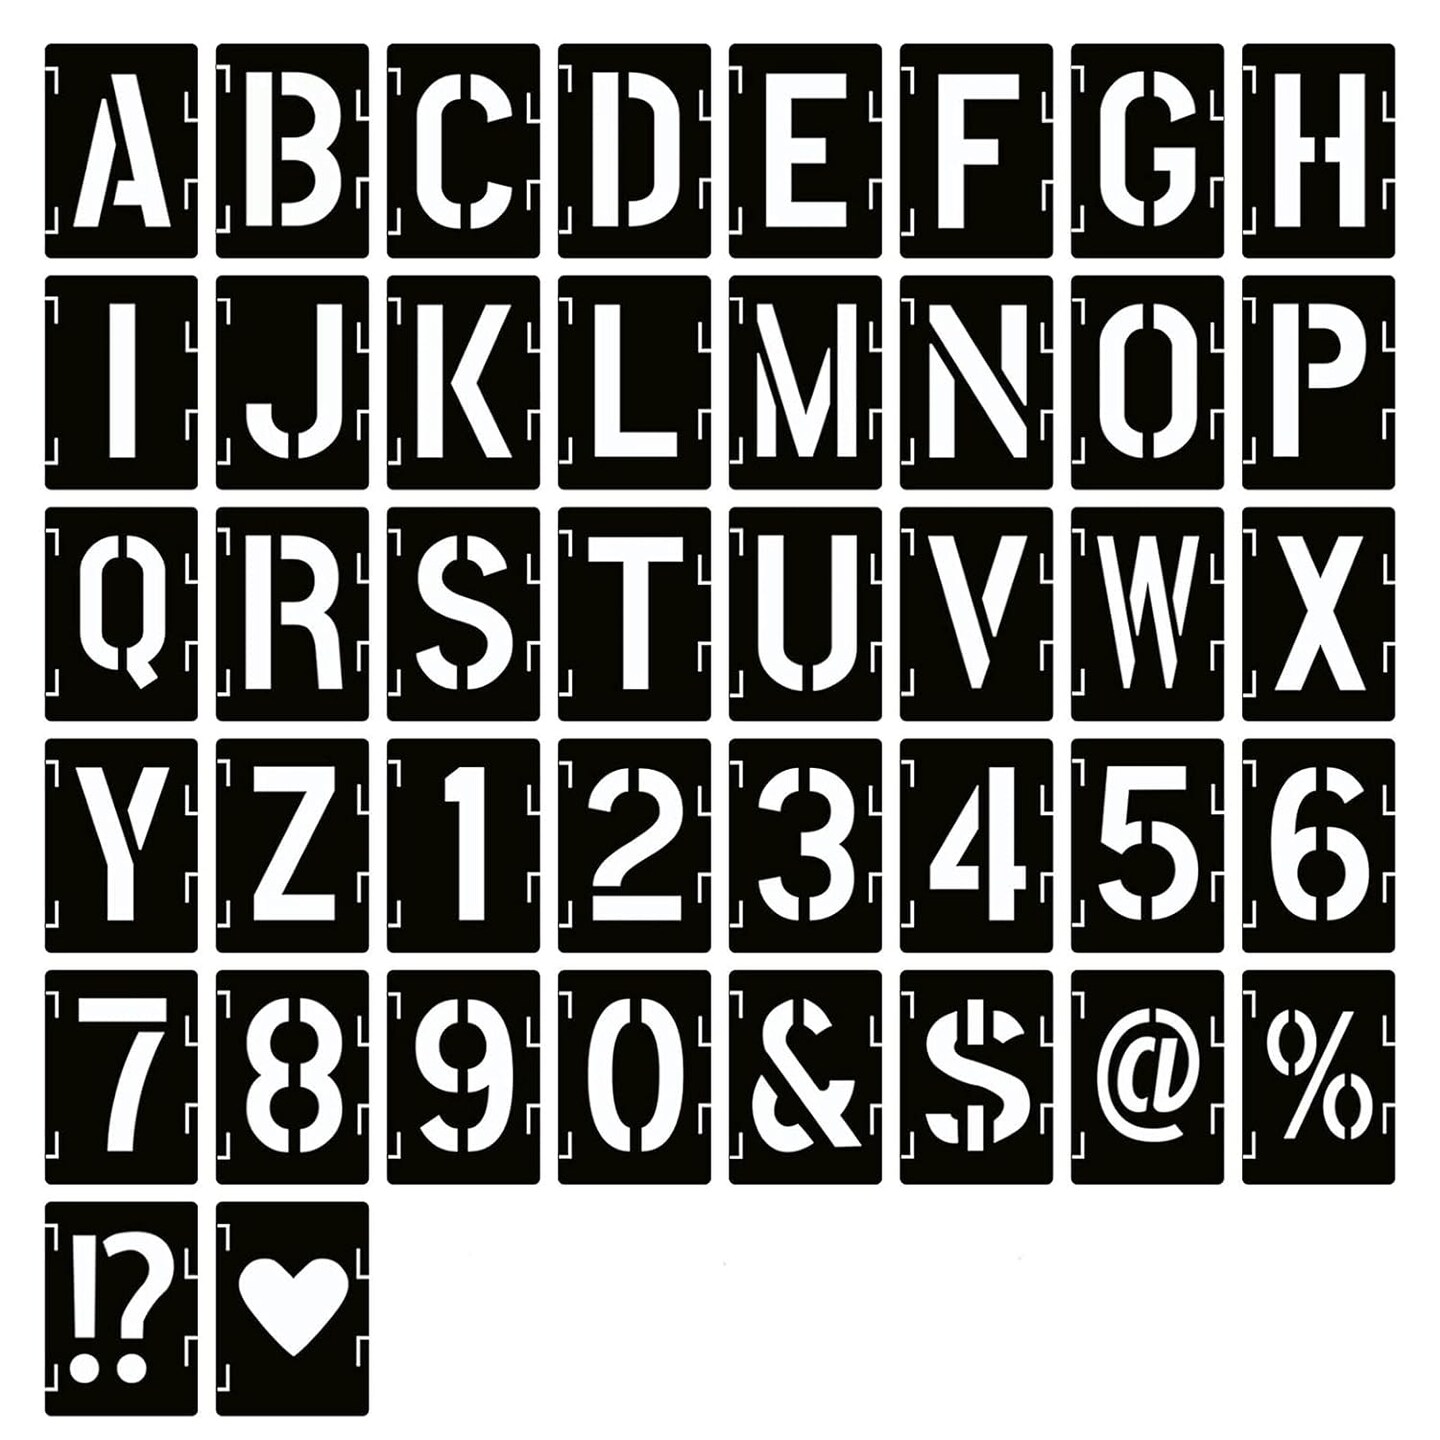 3 Inch Letter Stencils Symbol Numbers Craft Stencils, 42 Pcs Reusable Alphabet Templates Interlocking Stencil Kit for Painting on Wood, Wall, Fabric, Rock, Chalkboard, Sign, DIY Art Projects